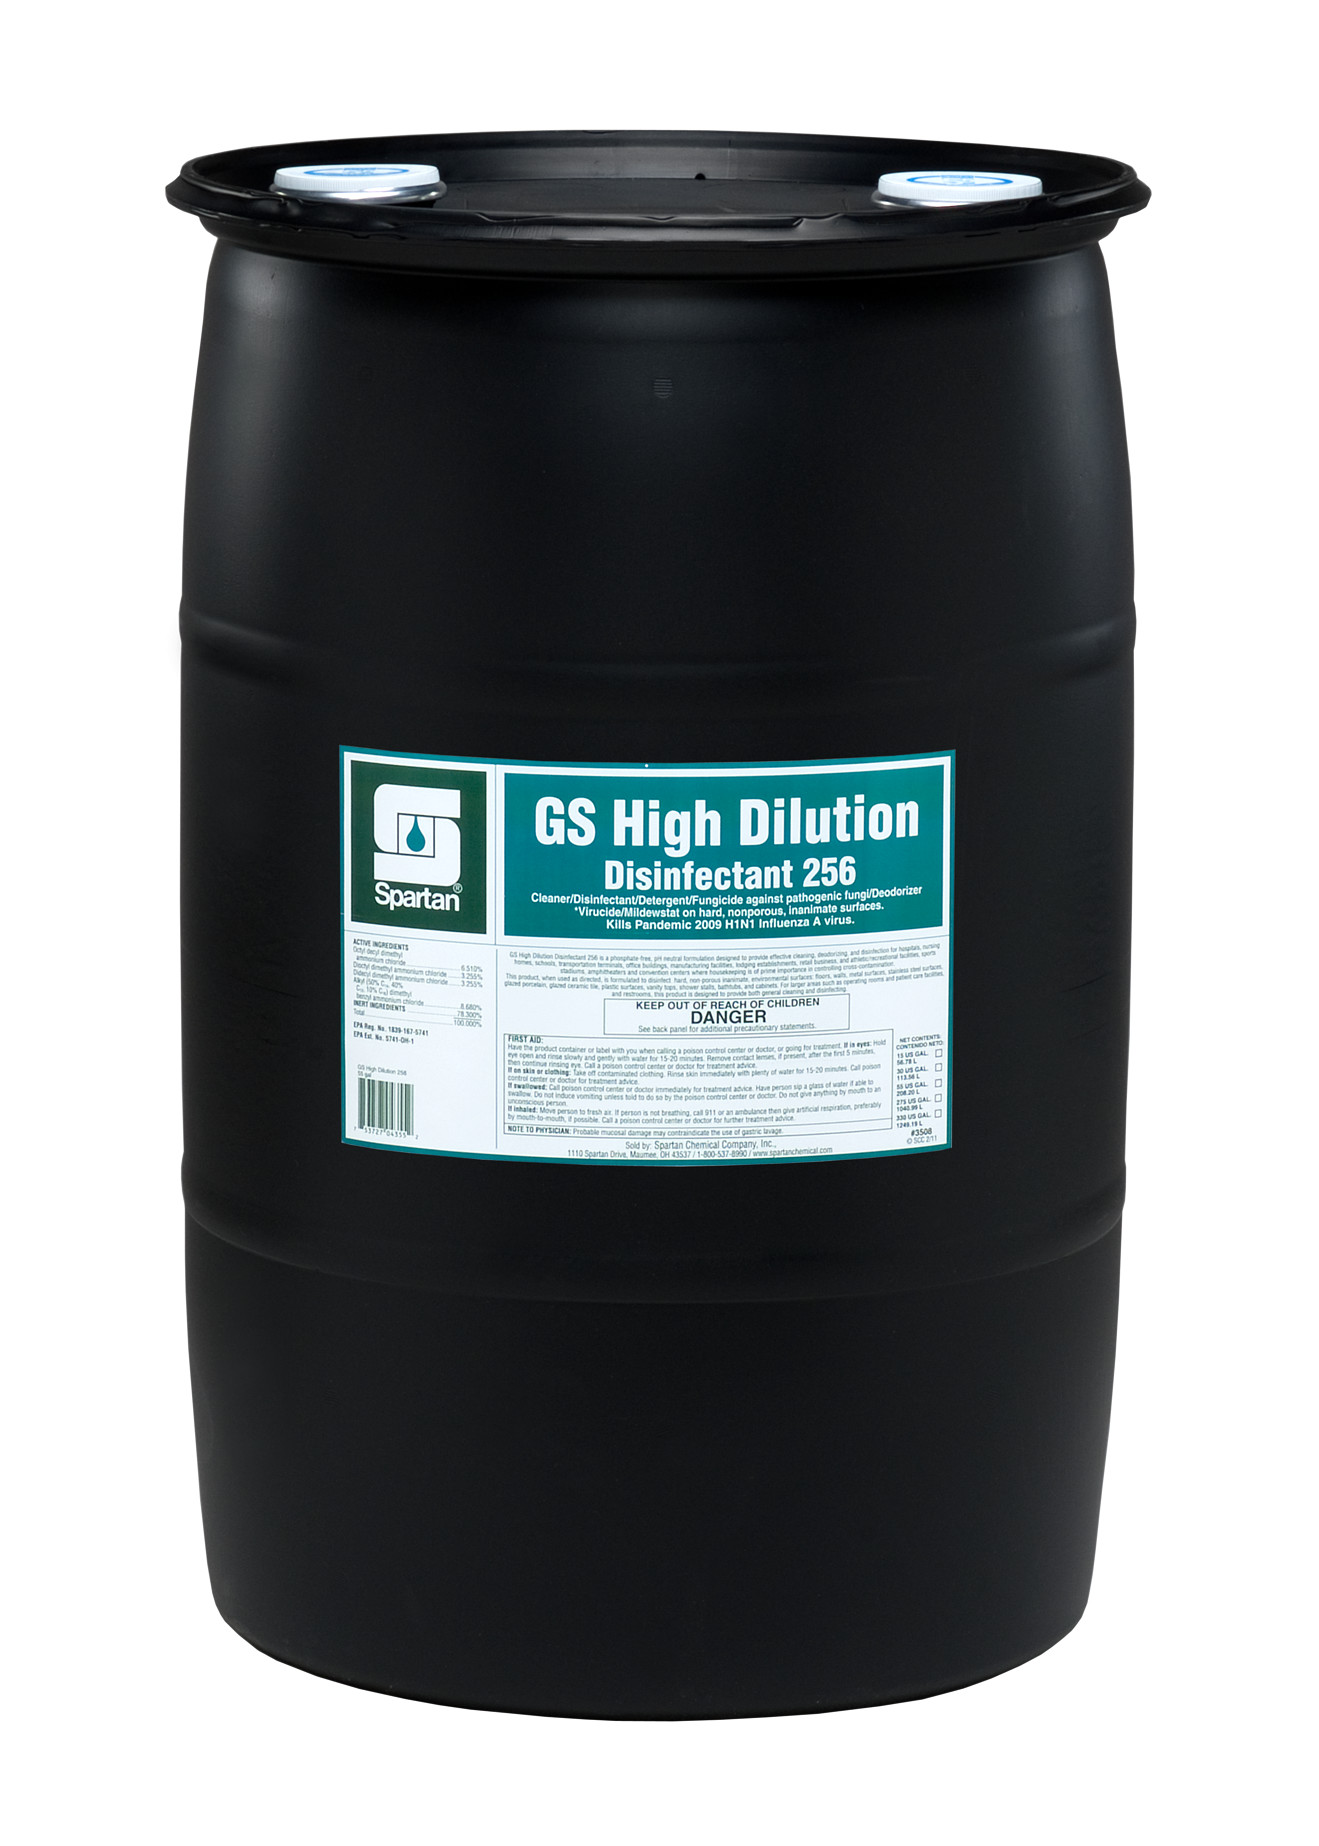 Spartan Chemical Company GS High Dilution Disinfectant 256, 30 GAL DRUM